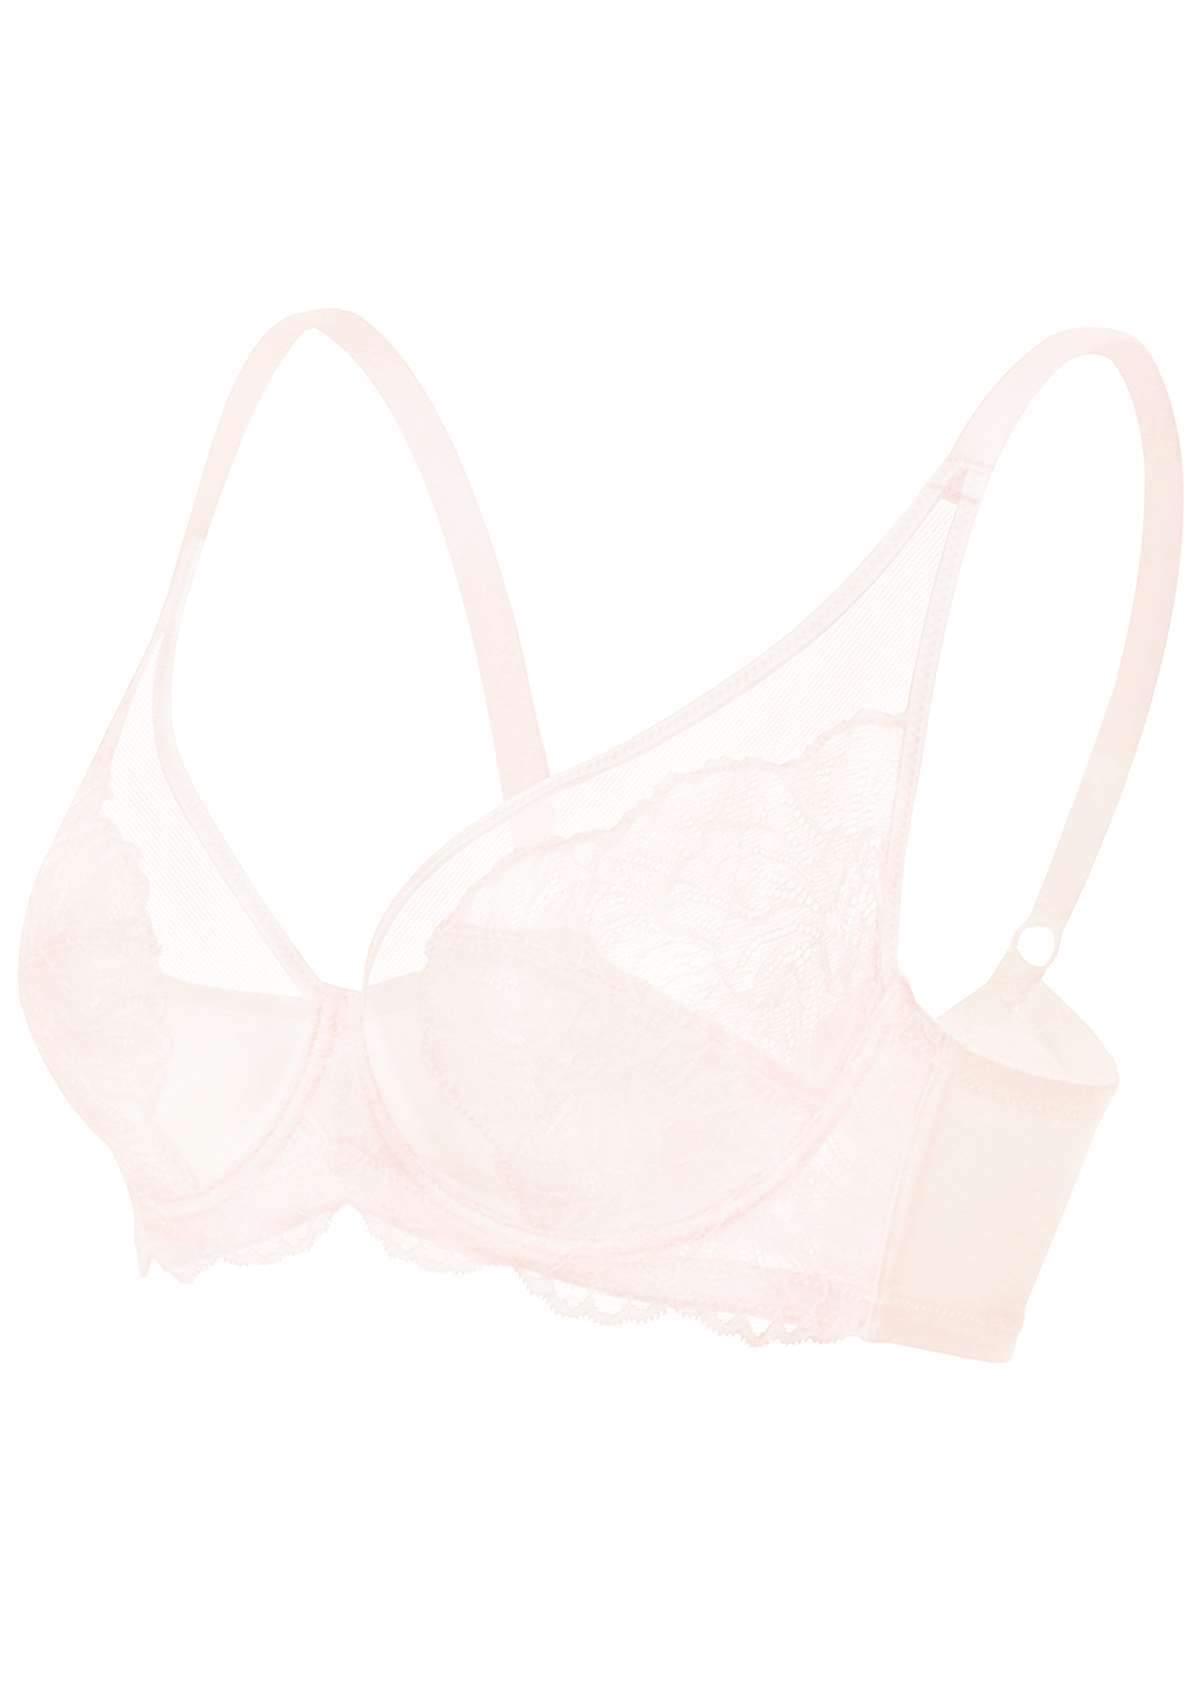 HSIA Blossom Sheer Lace Bra: Comfortable Underwire Bra For Big Busts - Dusty Peach / 46 / D